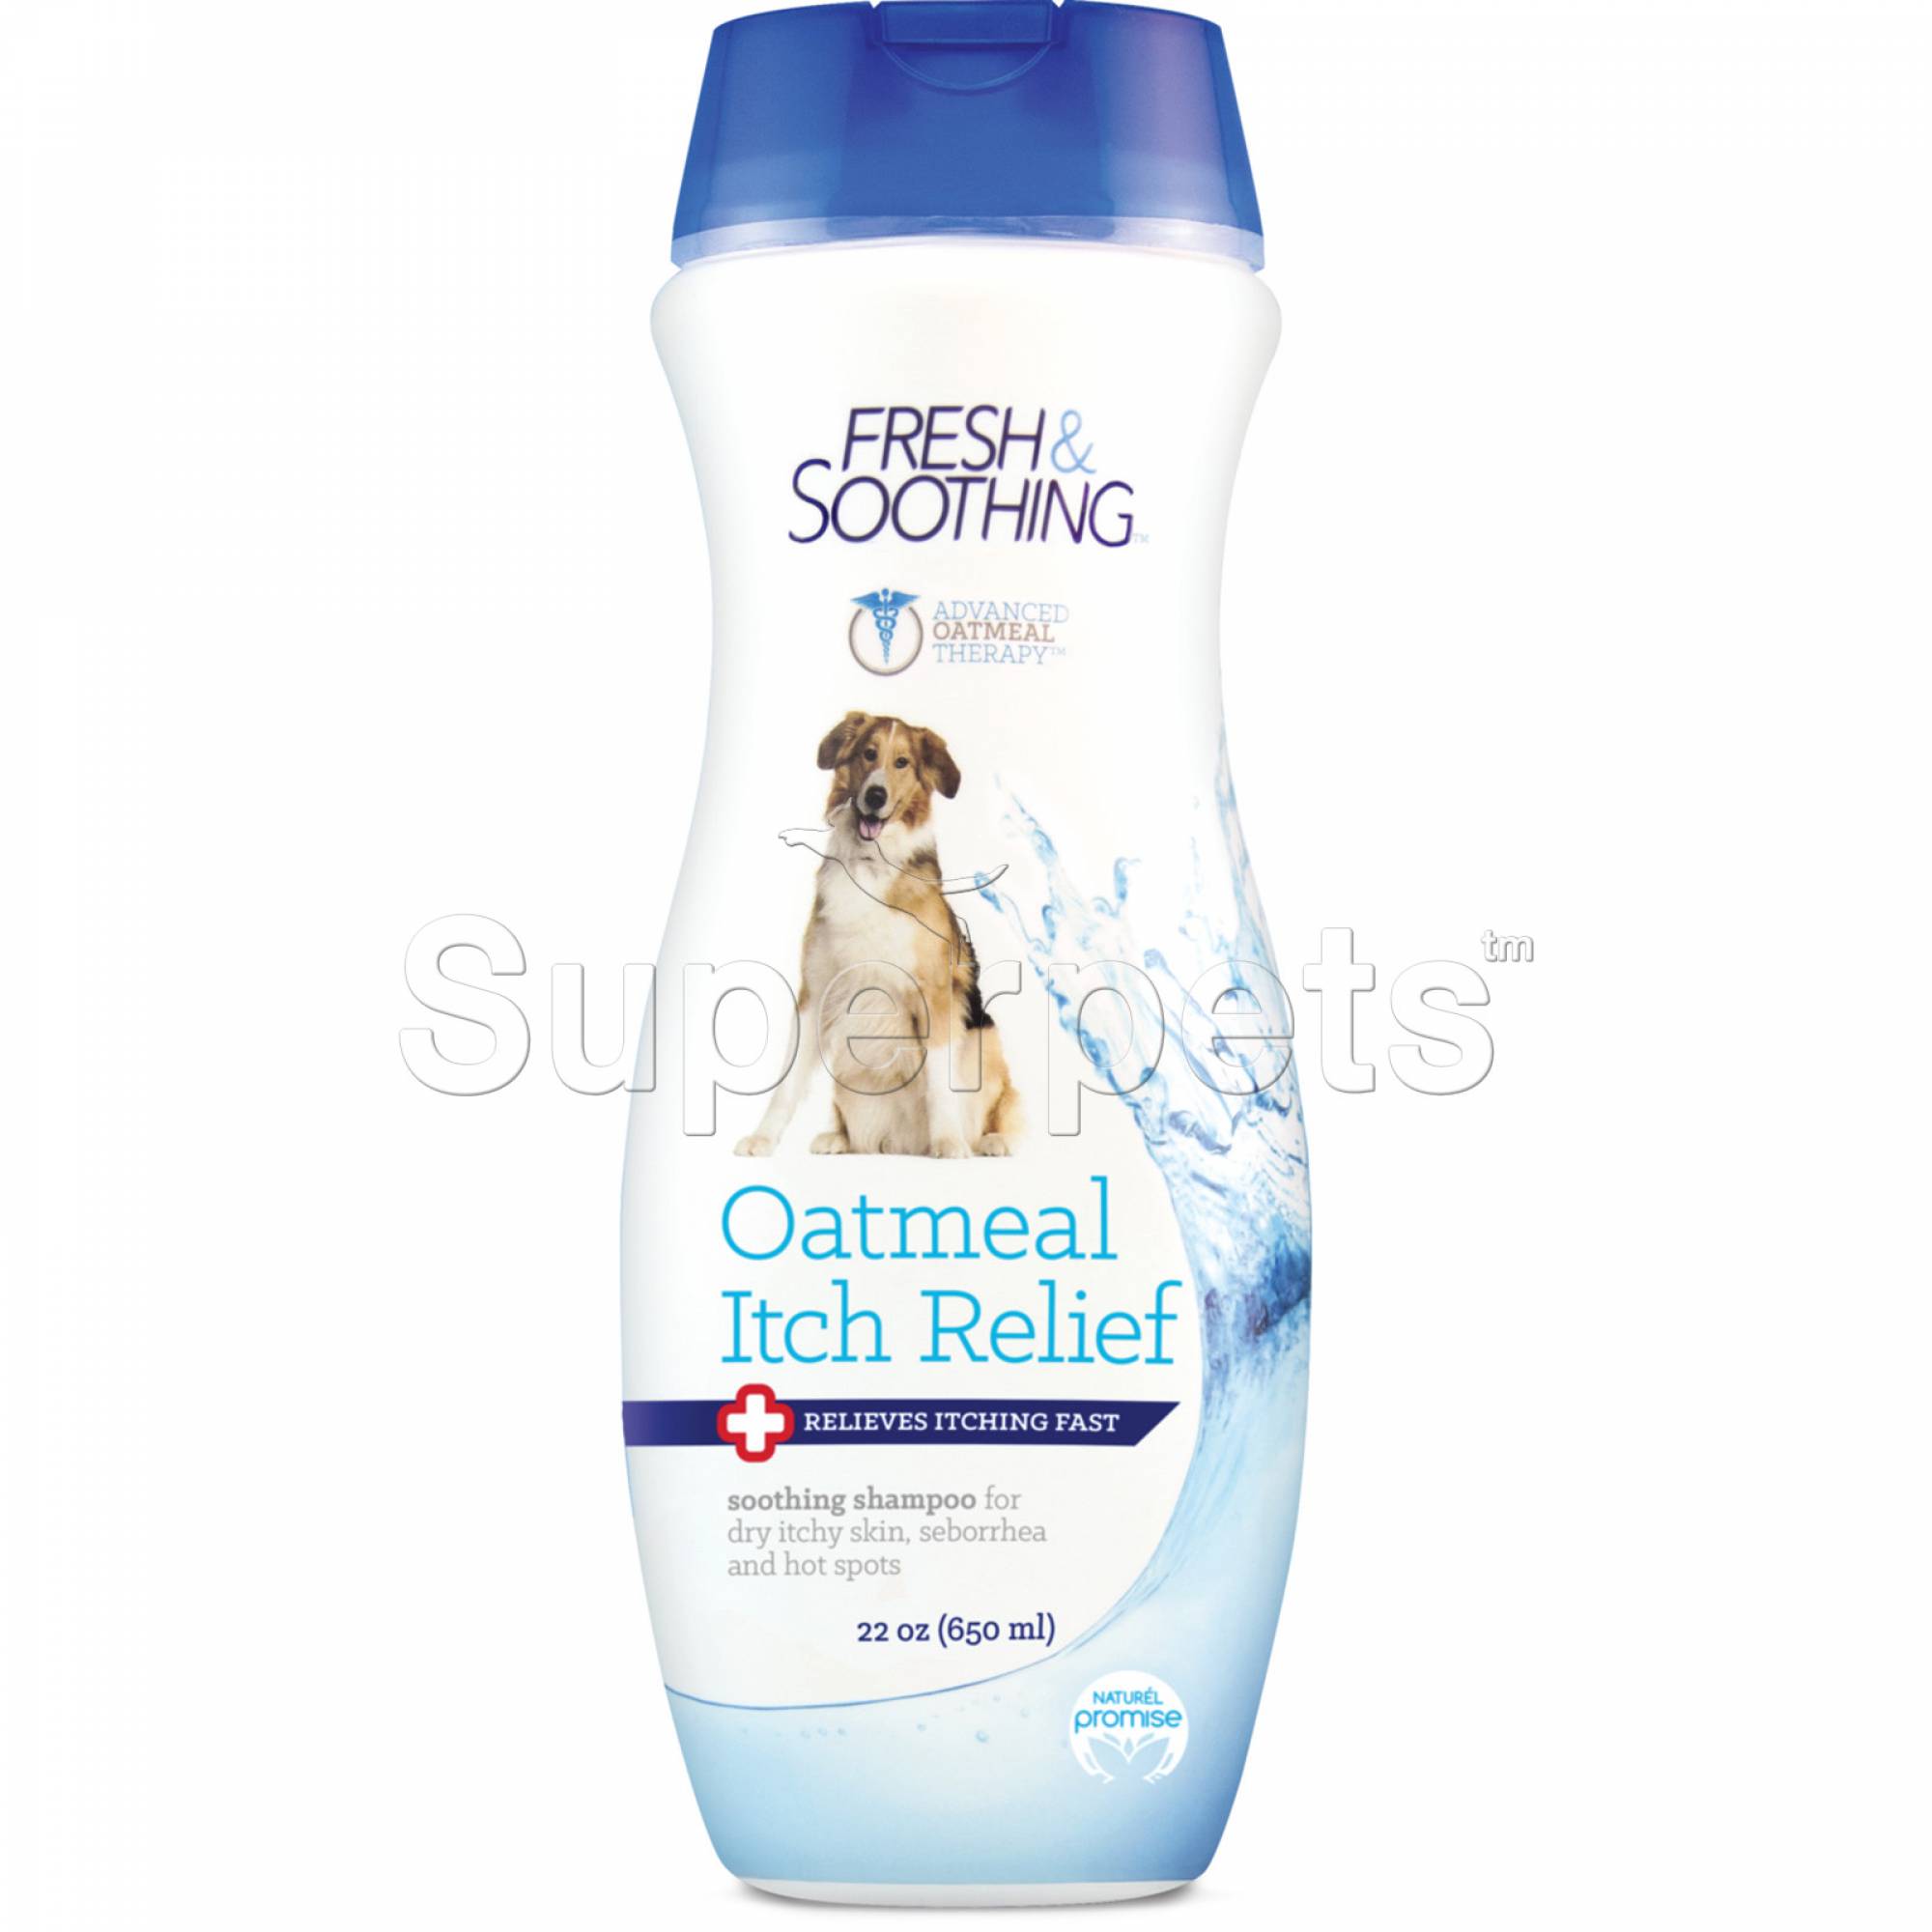 Naturel Promise Fresh & Soothing Oatmeal Itch Relief Shampoo 22oz (650ml)